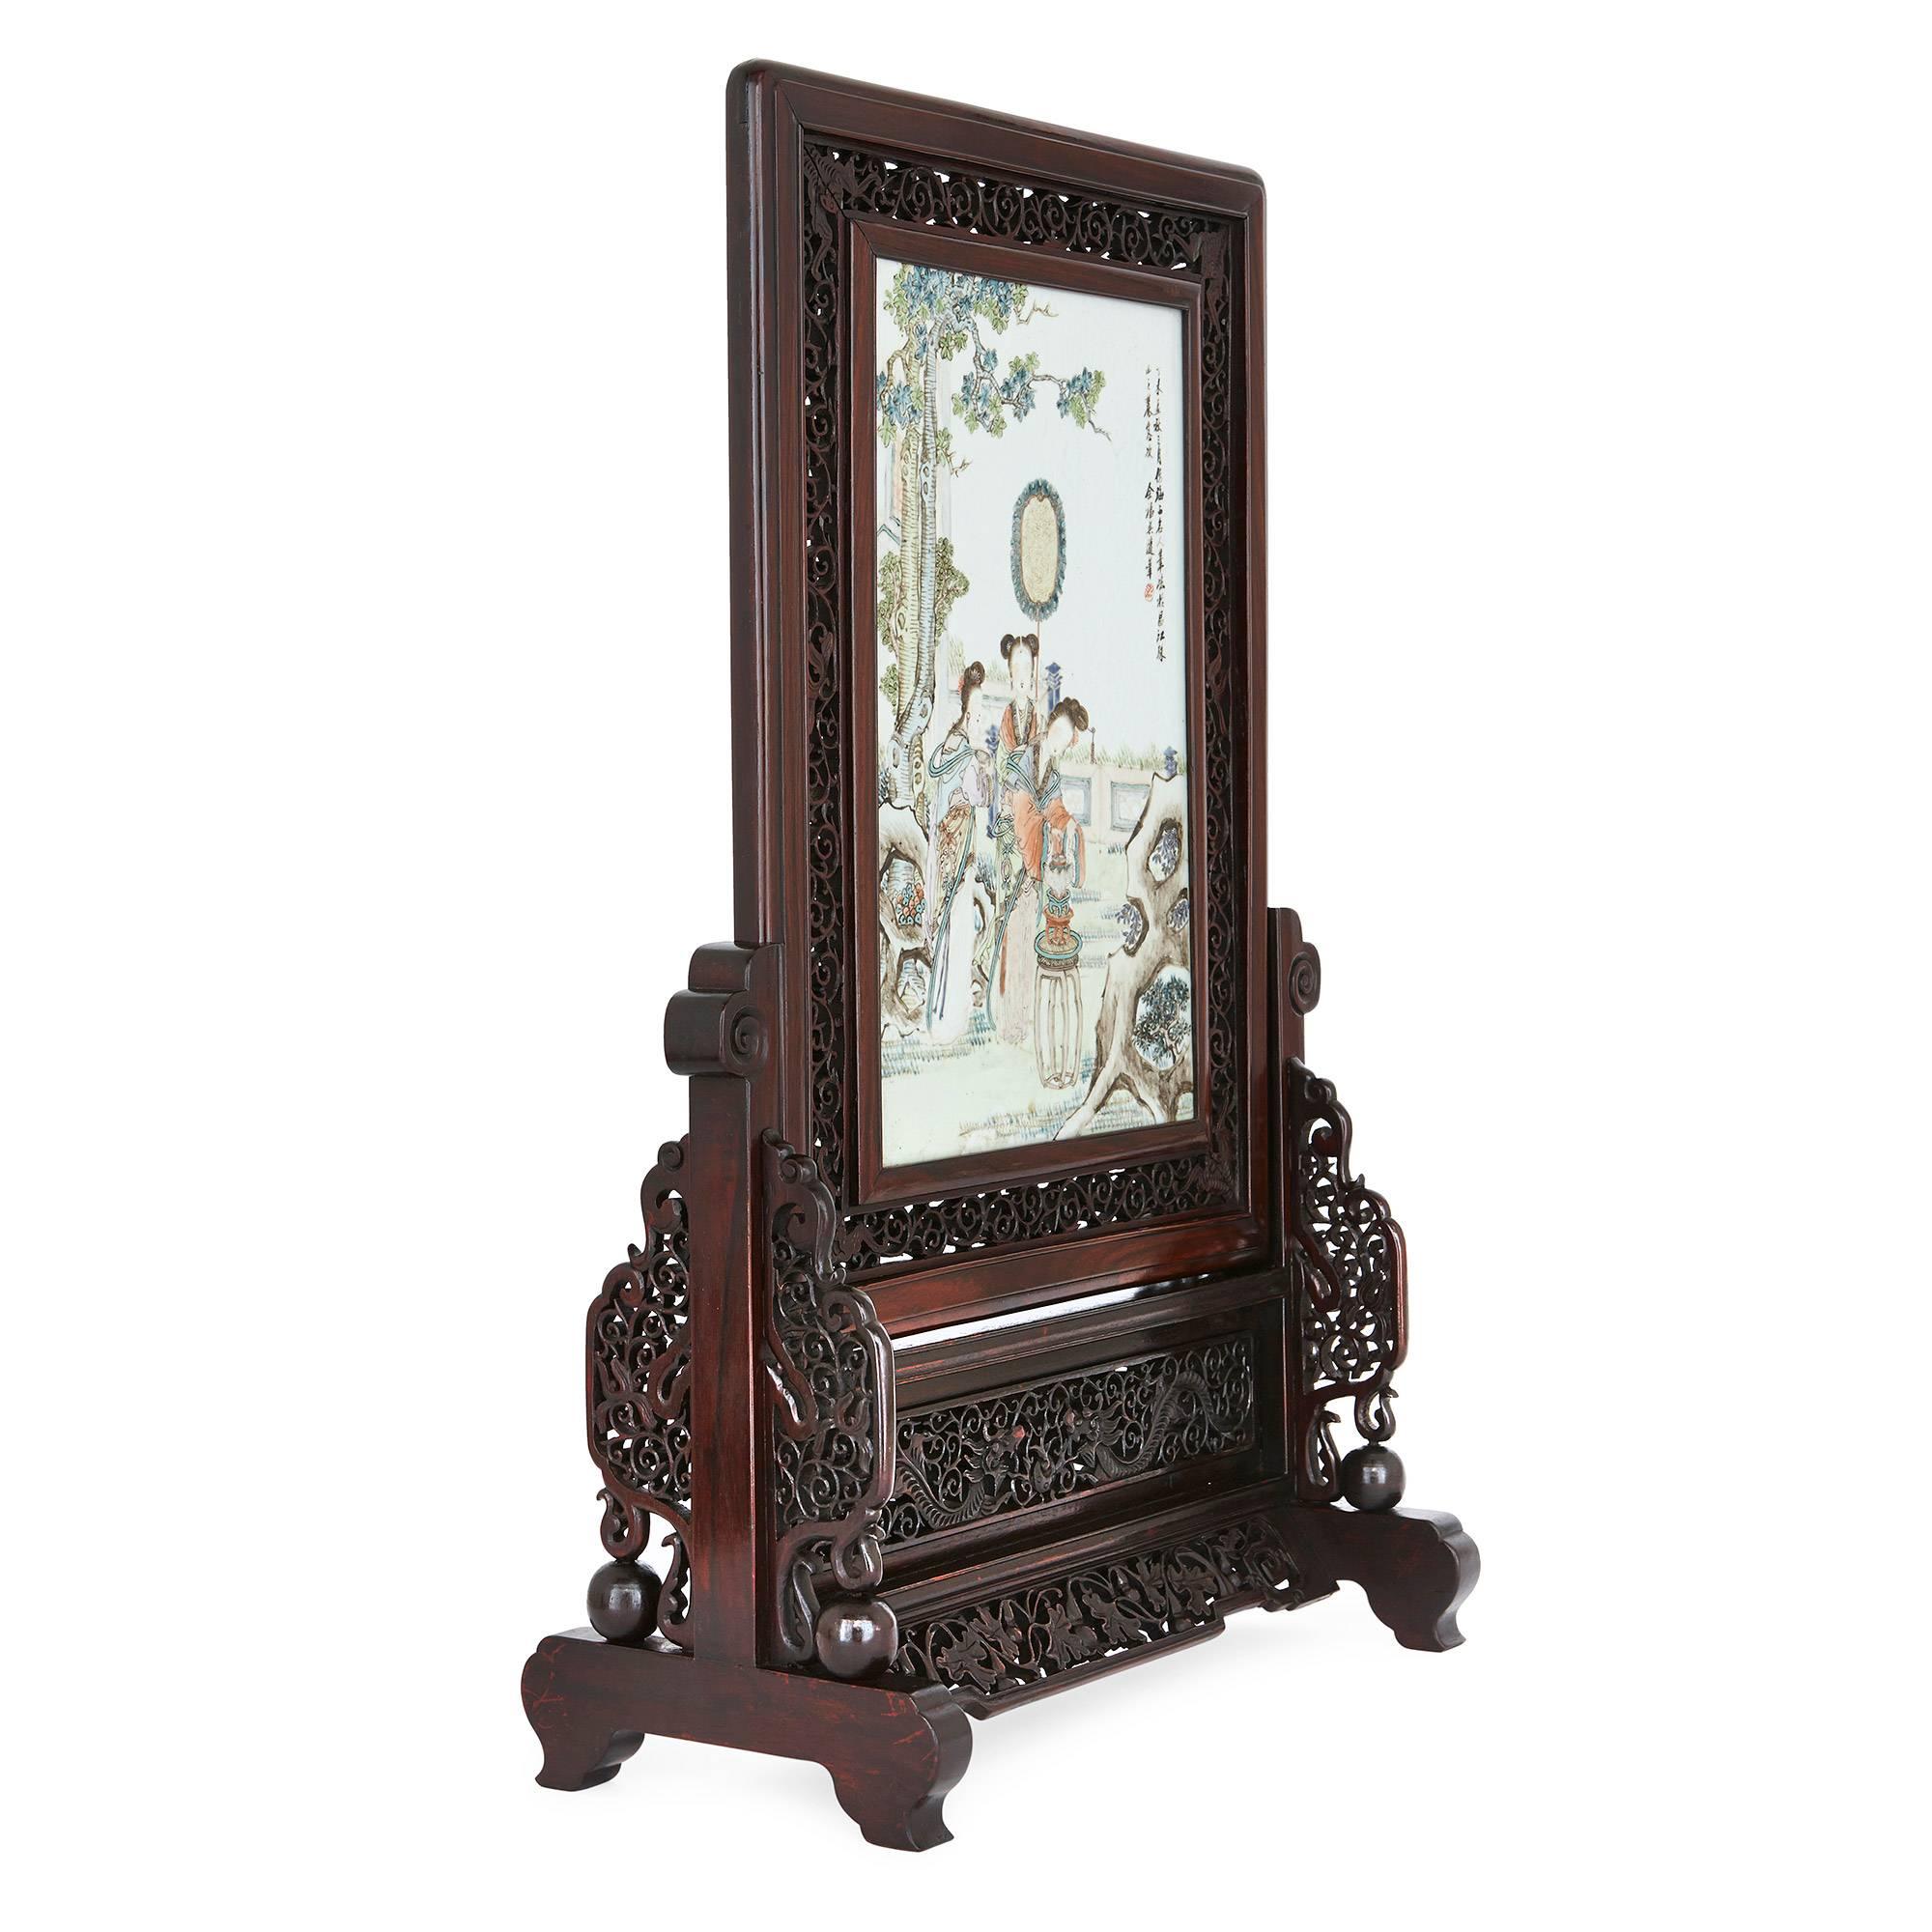 This exquisite Chinese screen is crafted from Hongmu, a dark rosewood from South East Asia. The ornately carved frame depicts dragons and scrolling foliate shapes. The central porcelain plaque depicts Chinese ladies in a detailed landscape with a